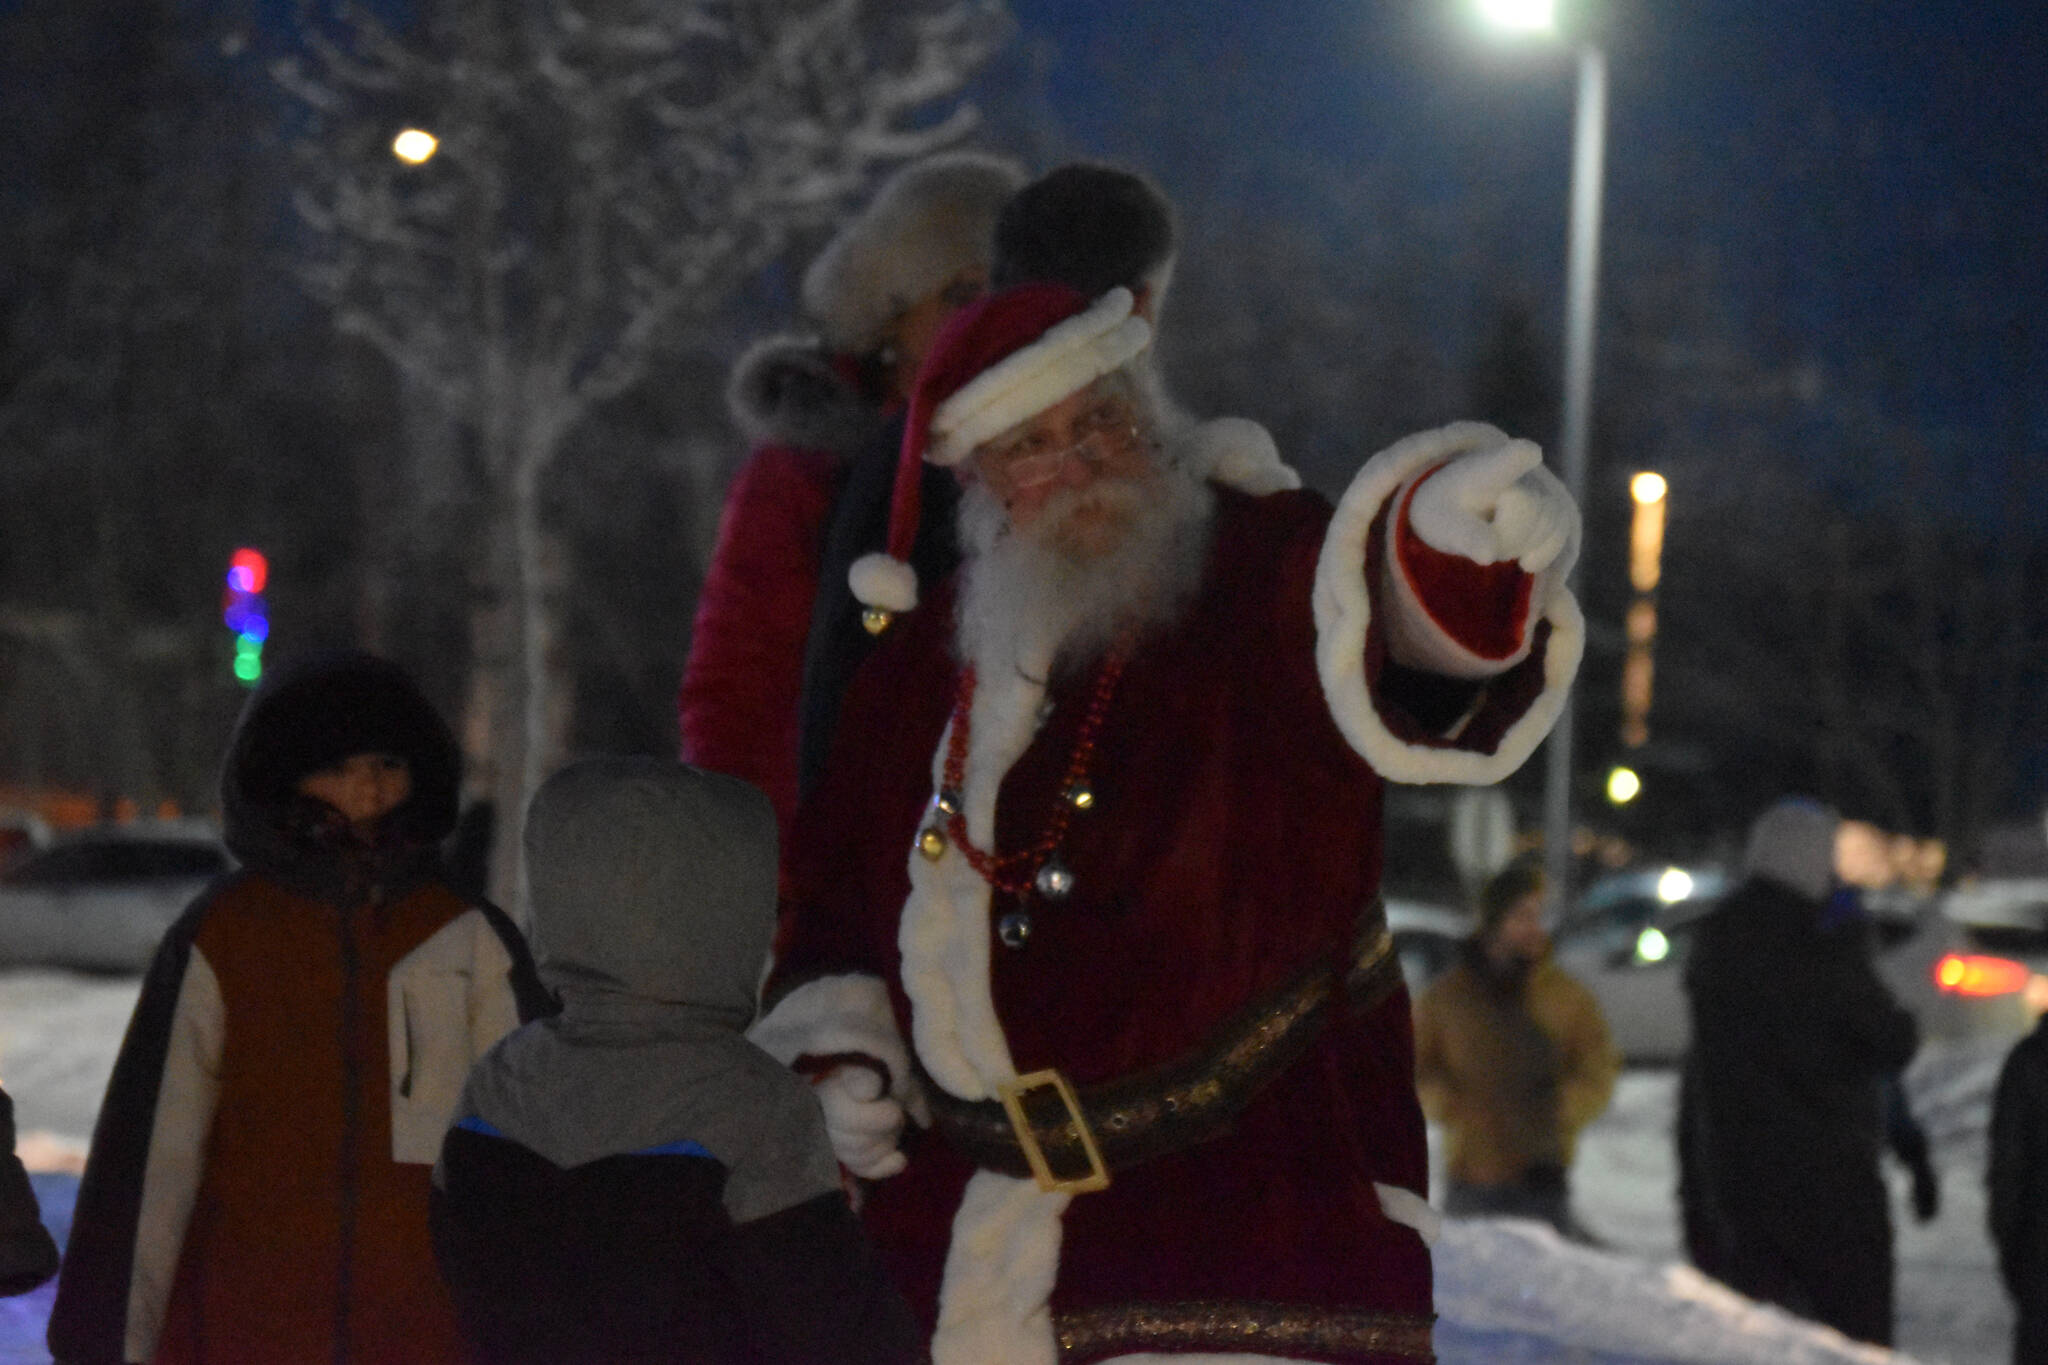 Santa Claus directs children to his stable during Christmas in the Park festivities on Saturday, Dec. 3, 2022, at Soldotna Creek Park in Soldotna, Alaska. (Jake Dye/Peninsula Clarion)